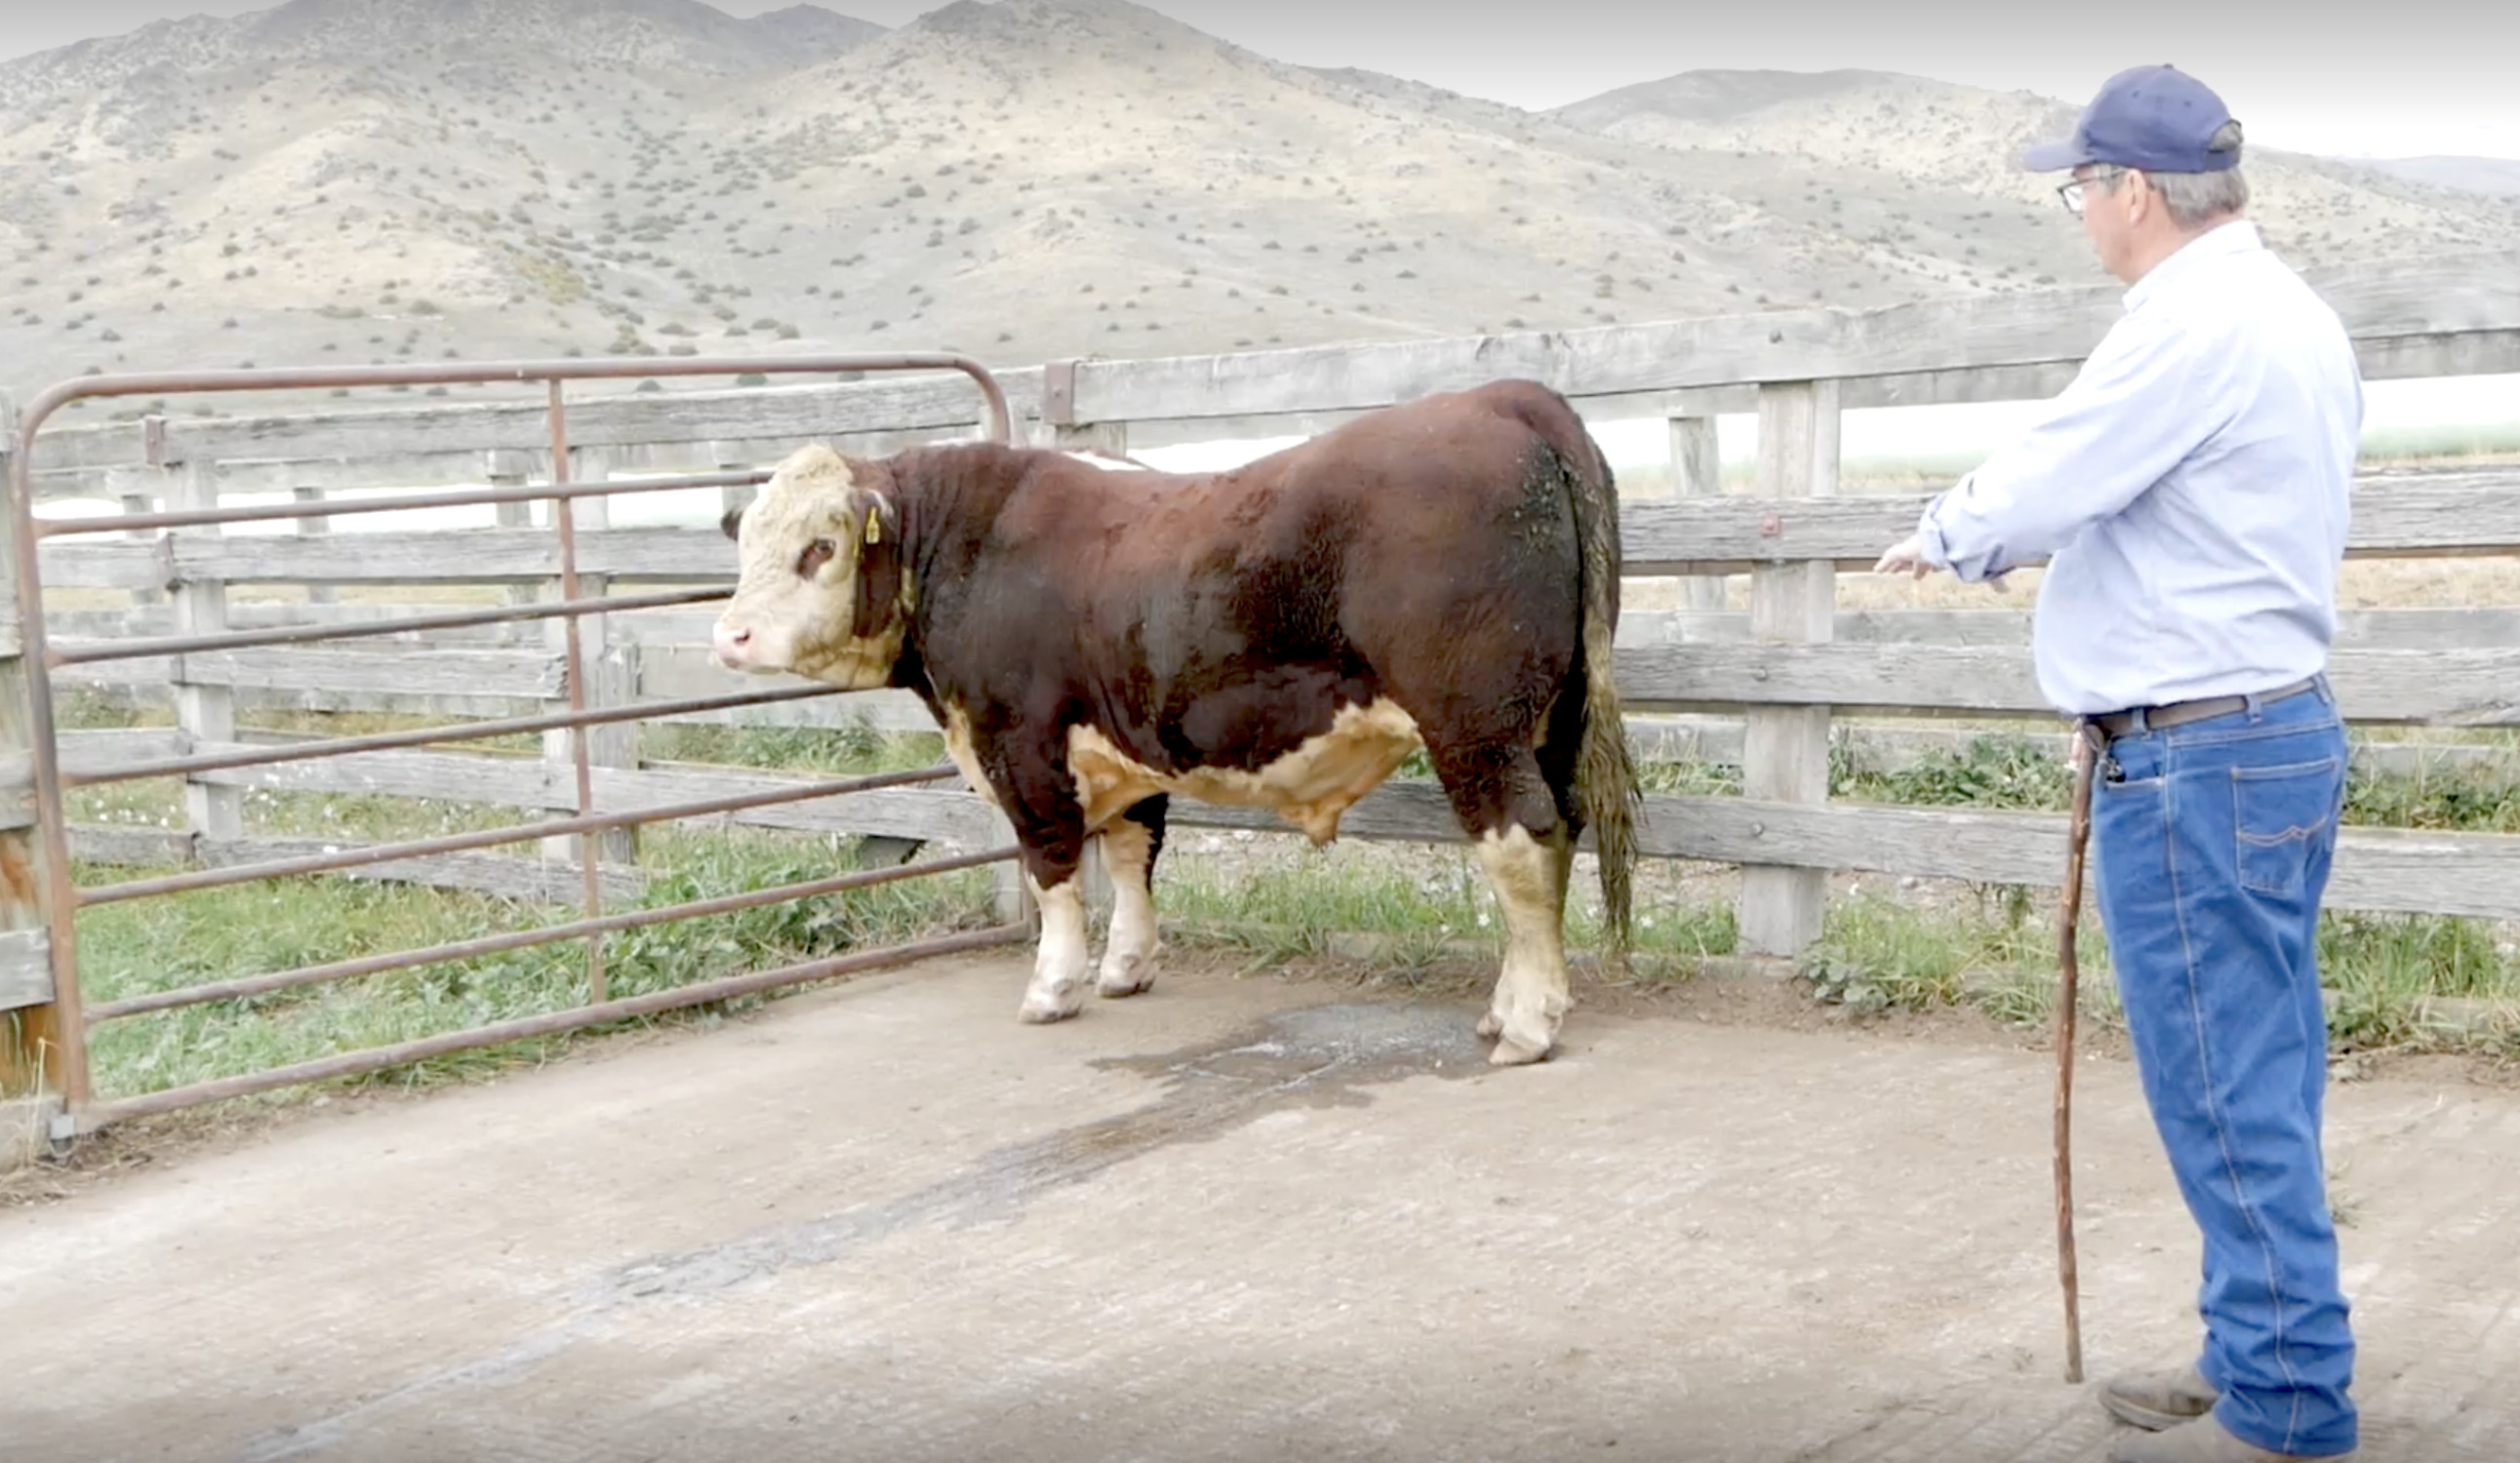 Bull assessment video aimed at commercial buyers  